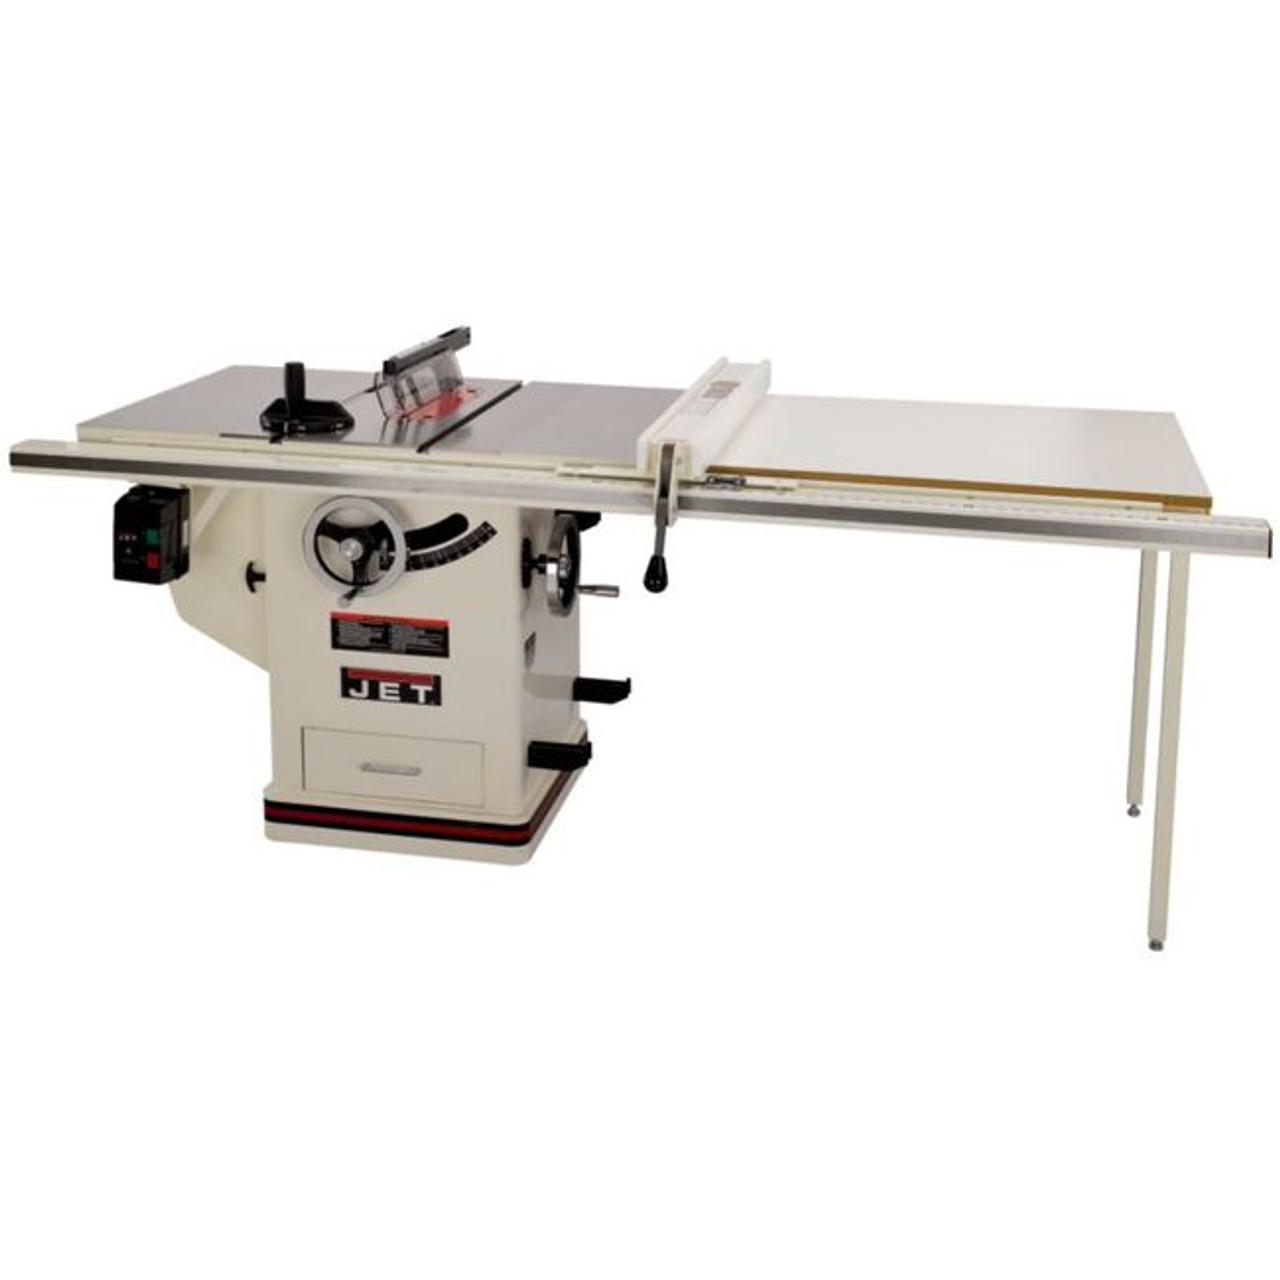 Jet Woodworking  Jet XACTA Saw Deluxe 3HP 1Ph 230V, 50" Fence System